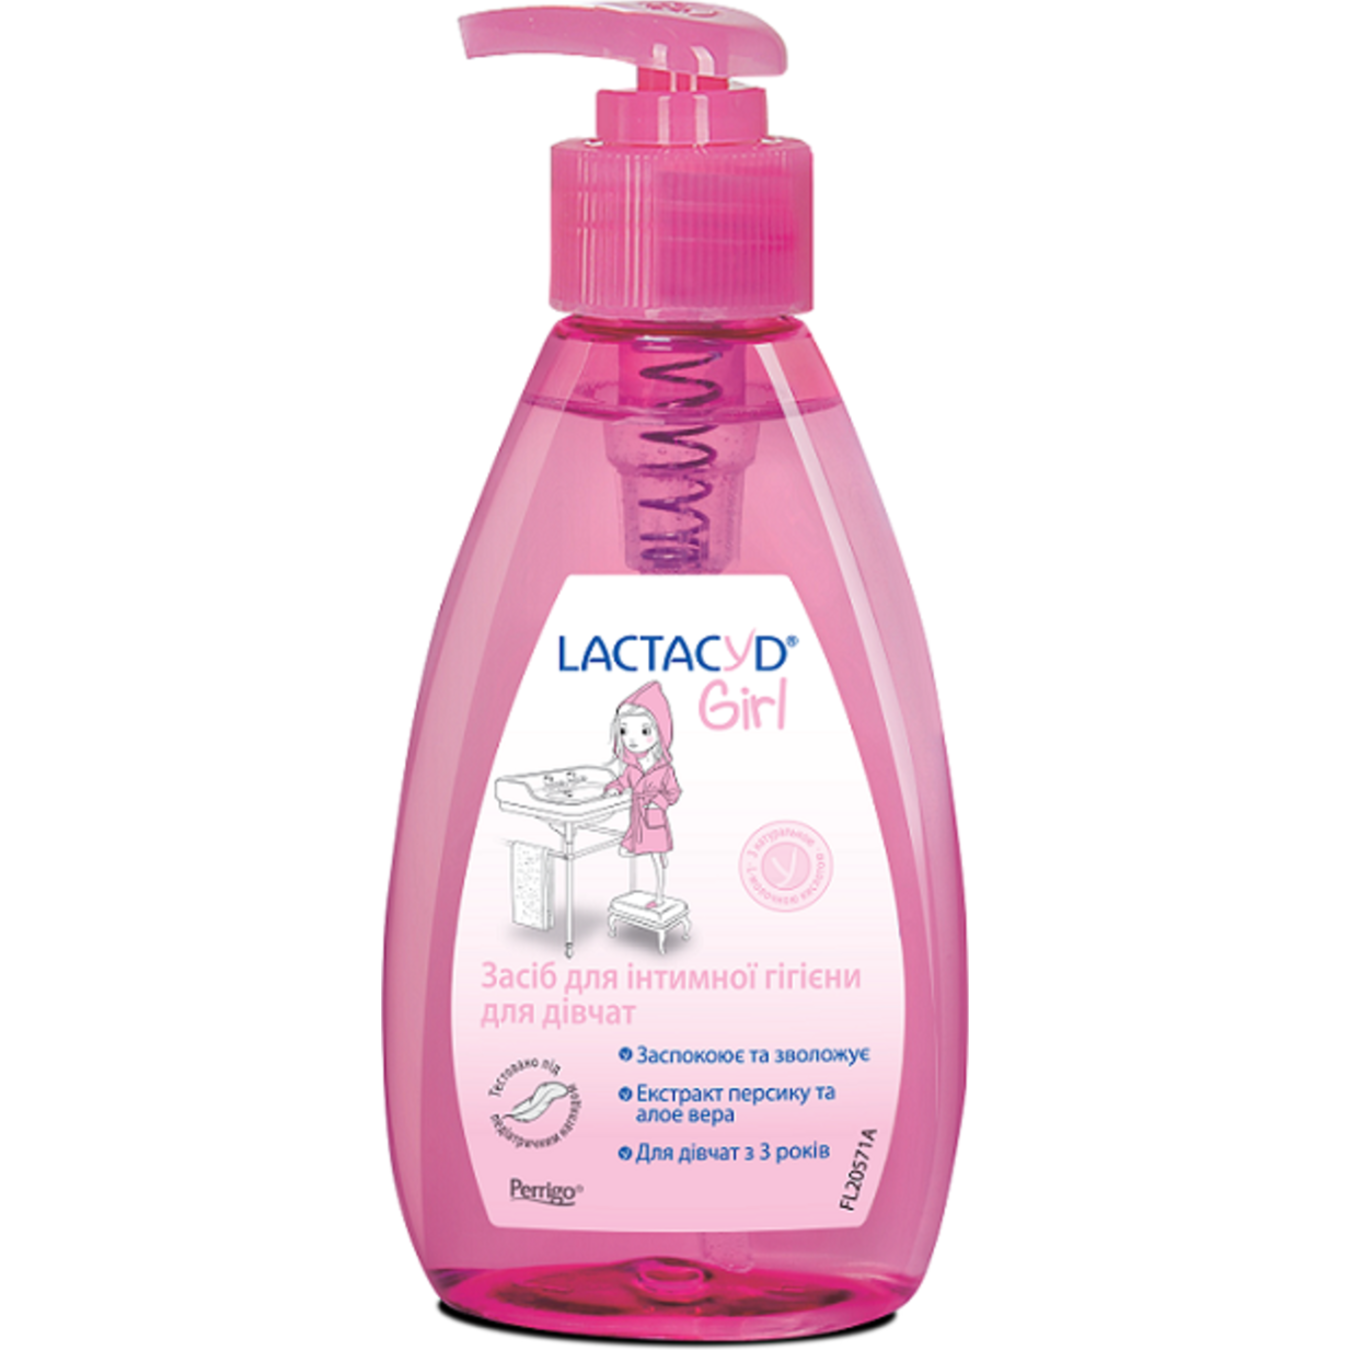 Lactacyd With Dispenser For Girls Intimate Hygiene Gel 200ml